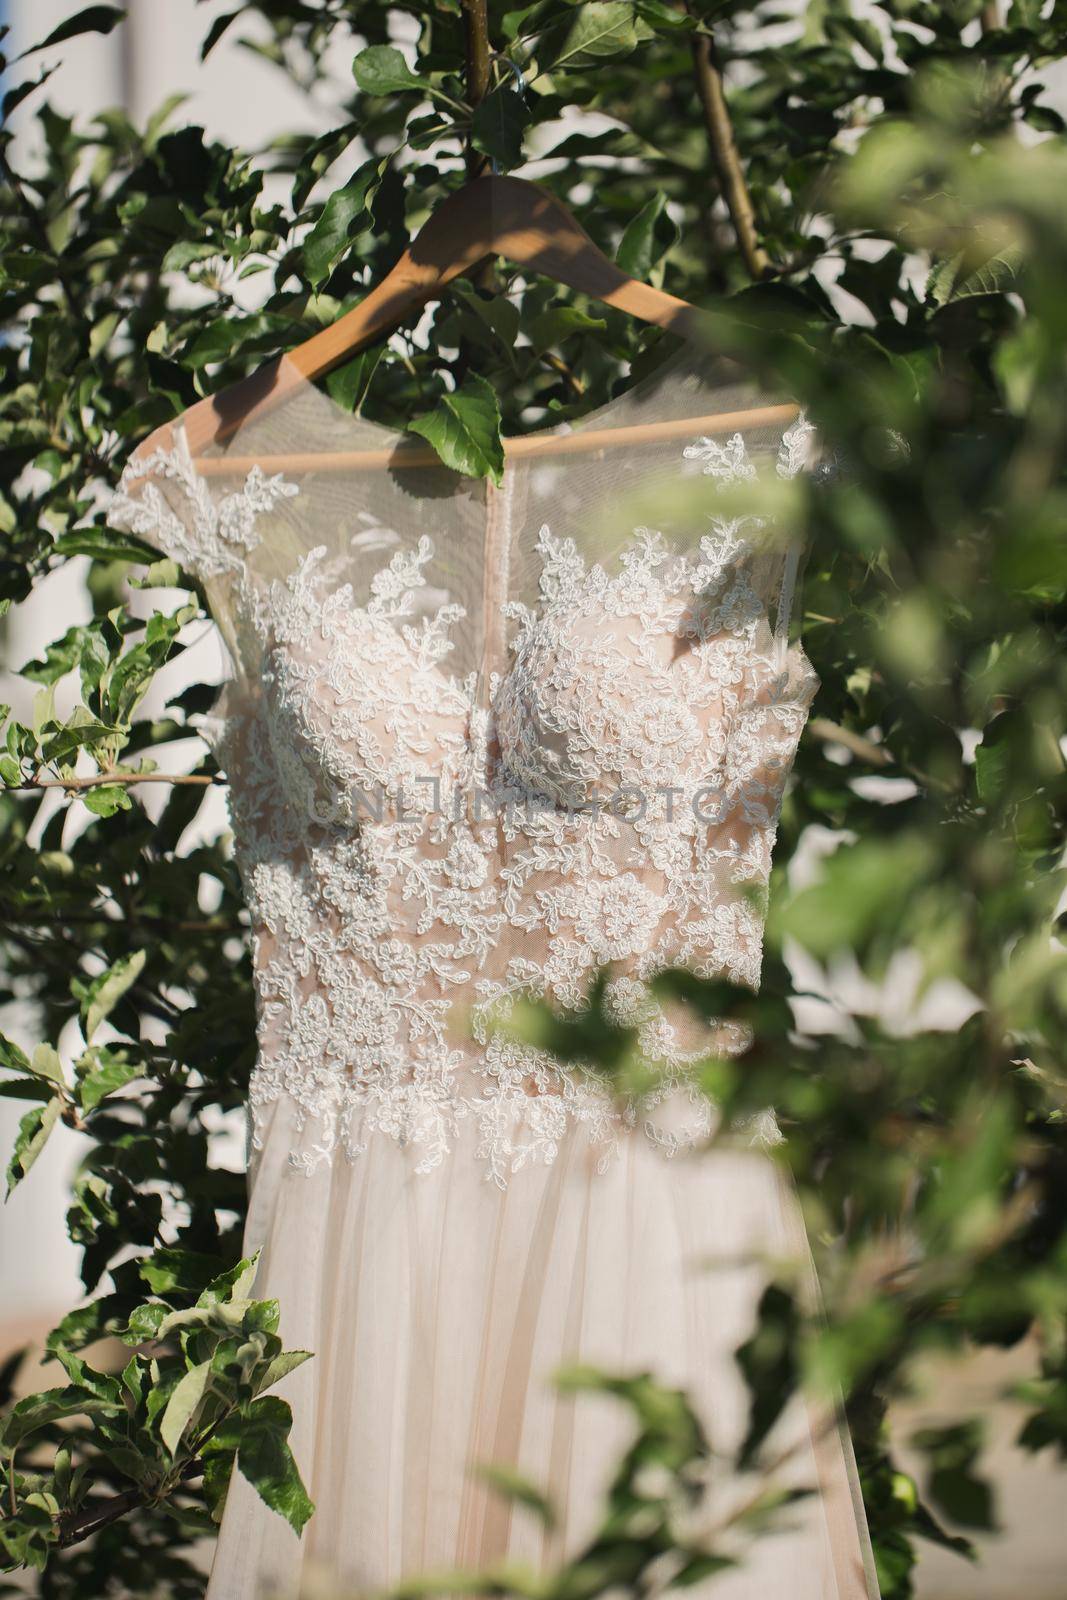 White wedding dress on hanger hanging from tree in the woods. by StudioPeace